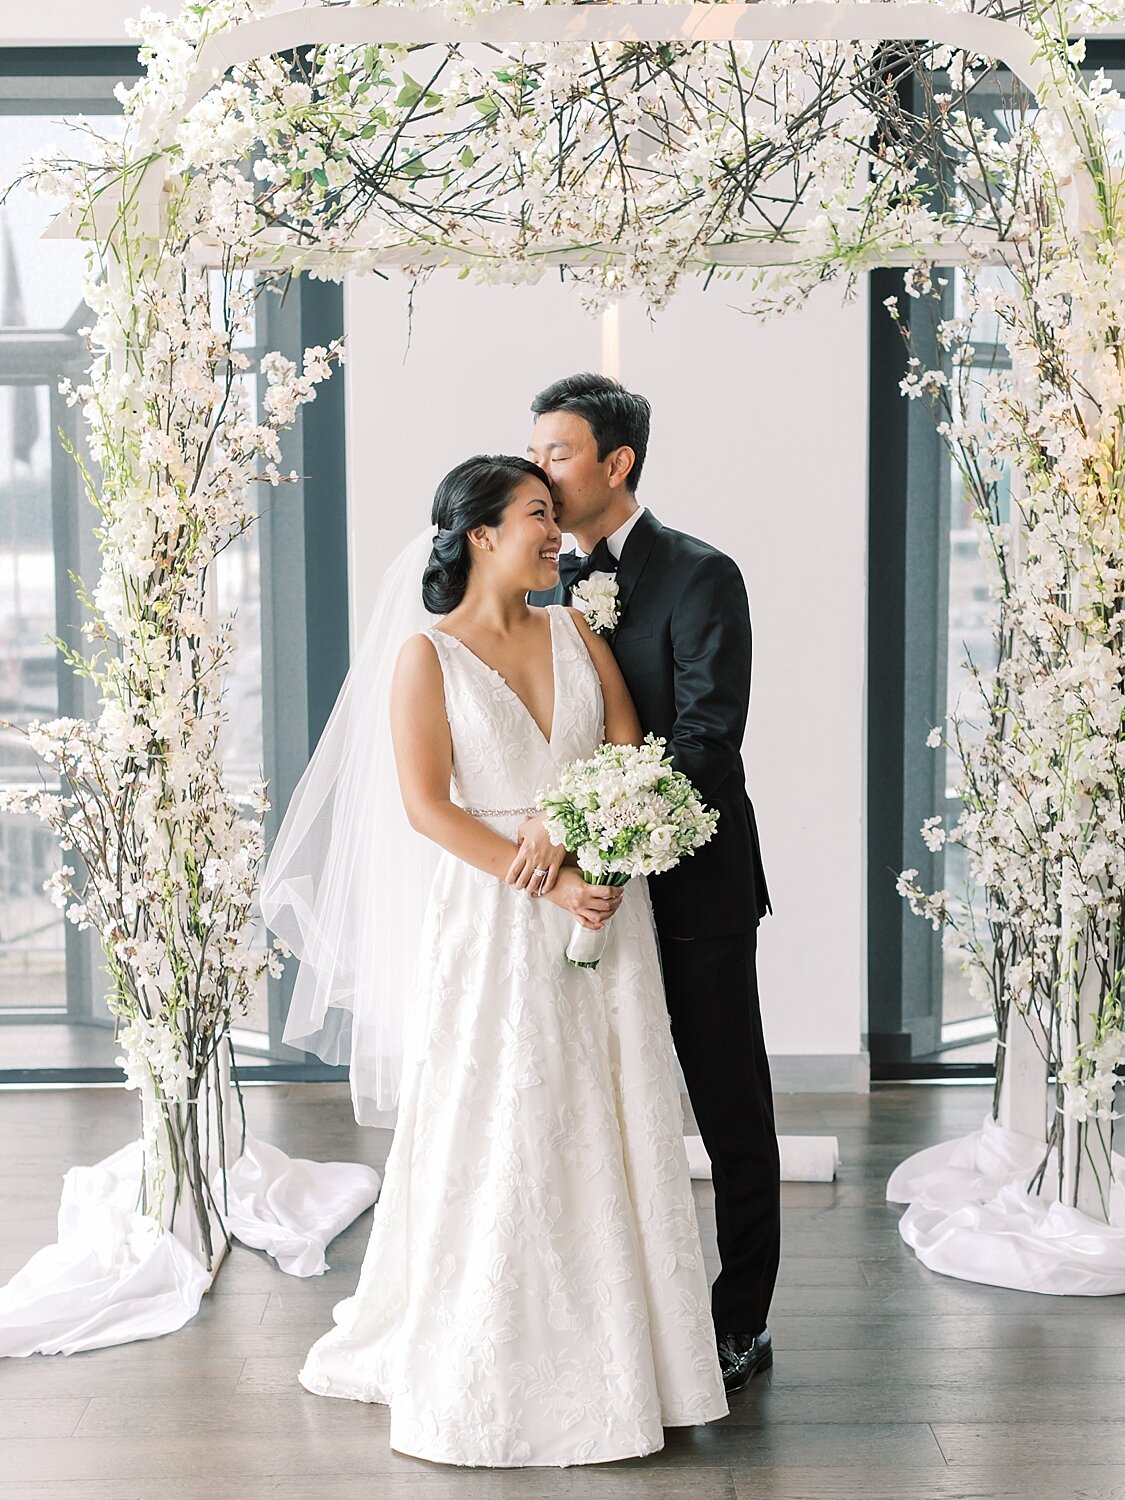 Wedding flowers by Superior Florist NYC